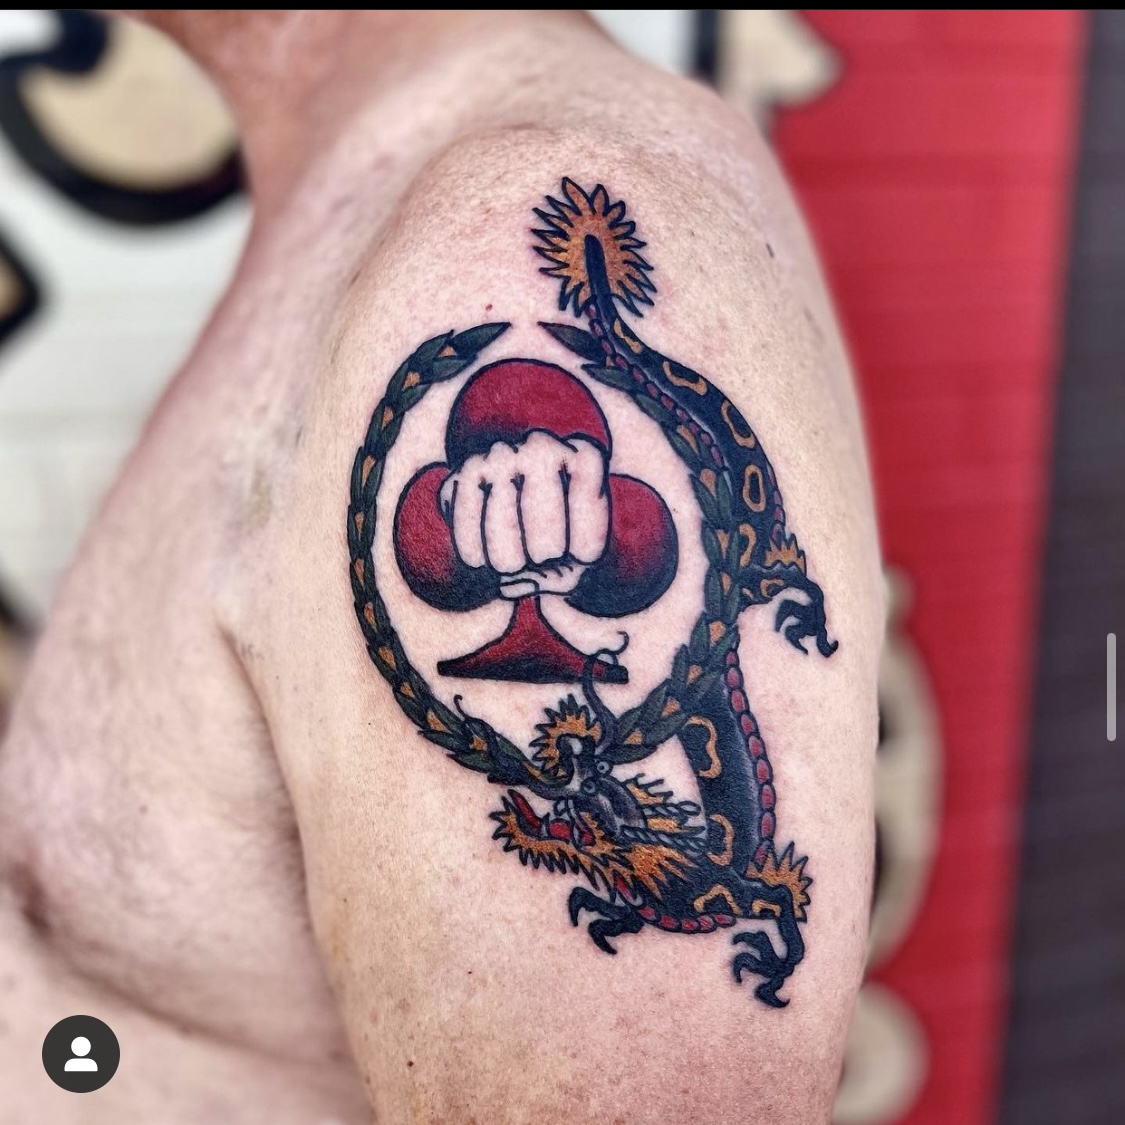 Tattoo of a dragon and a fist on a man's shoulder from top tattoo shop in Dallas TX